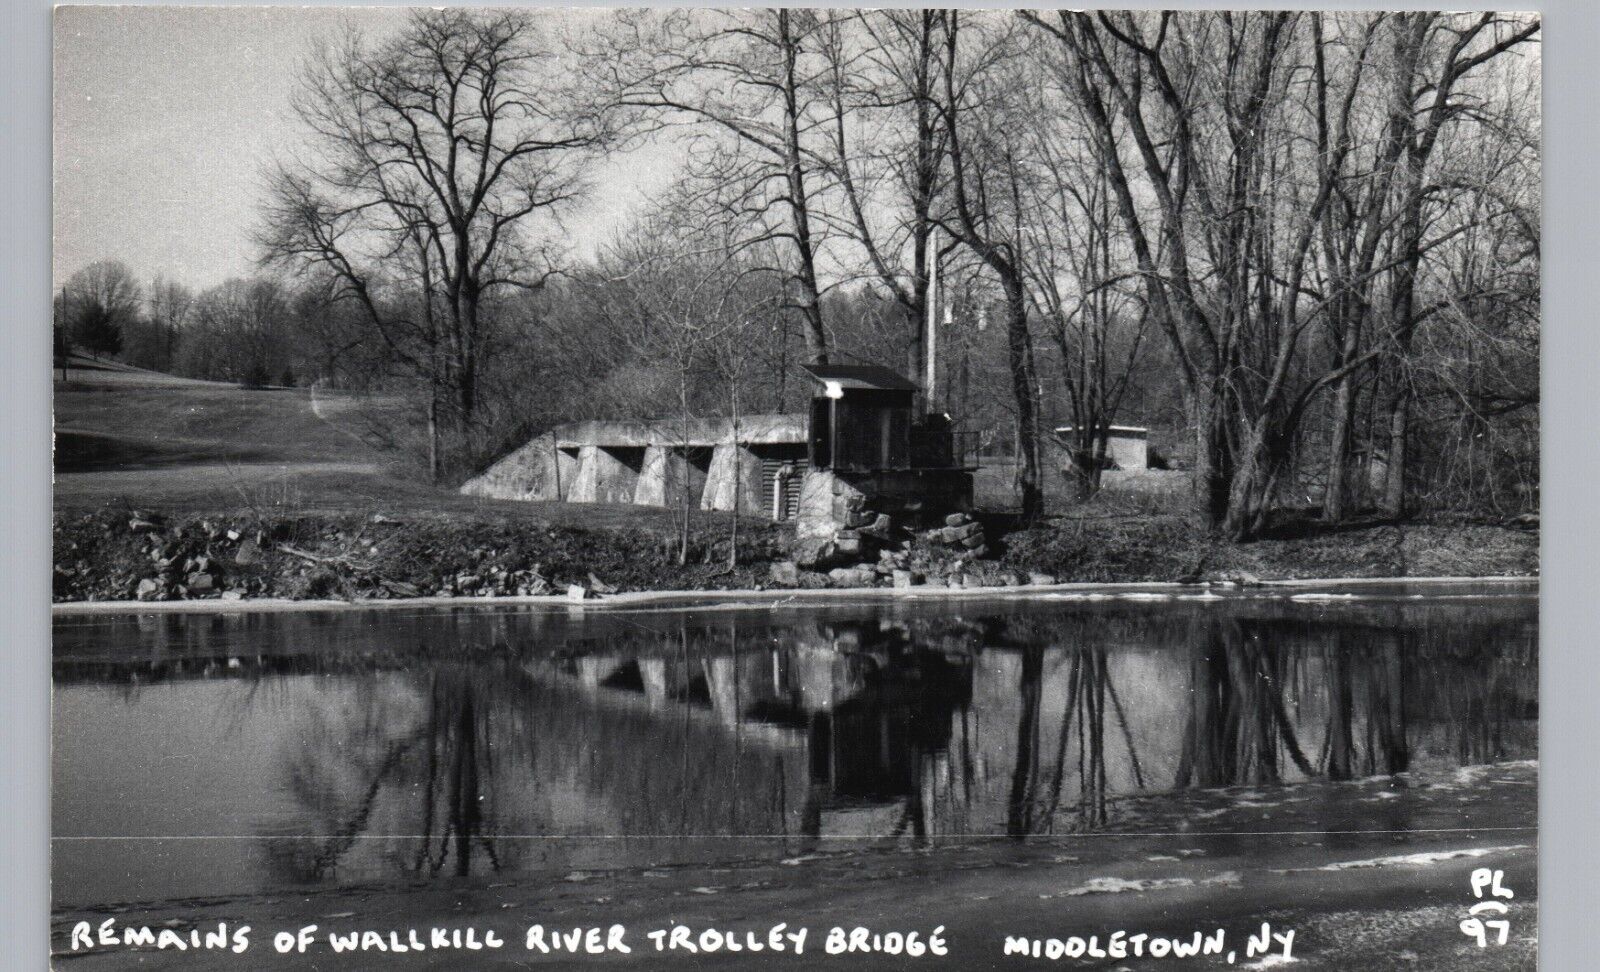 TROLLEY BRIDGE REMAINS wallkill river middletown ny real photo postcard rppc